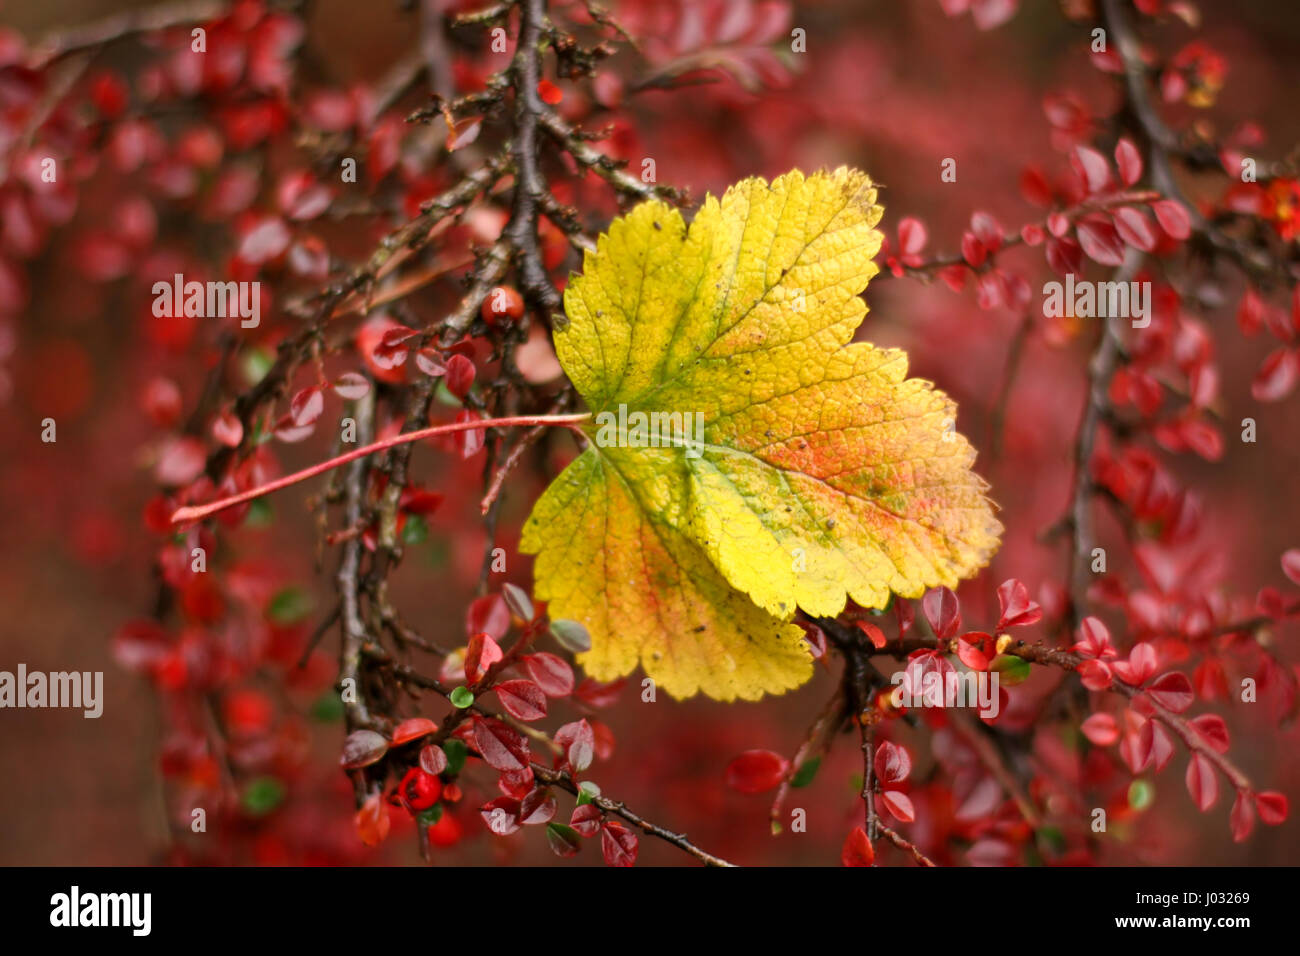 Yellow leaf on a tree with very red small leaves Stock Photo